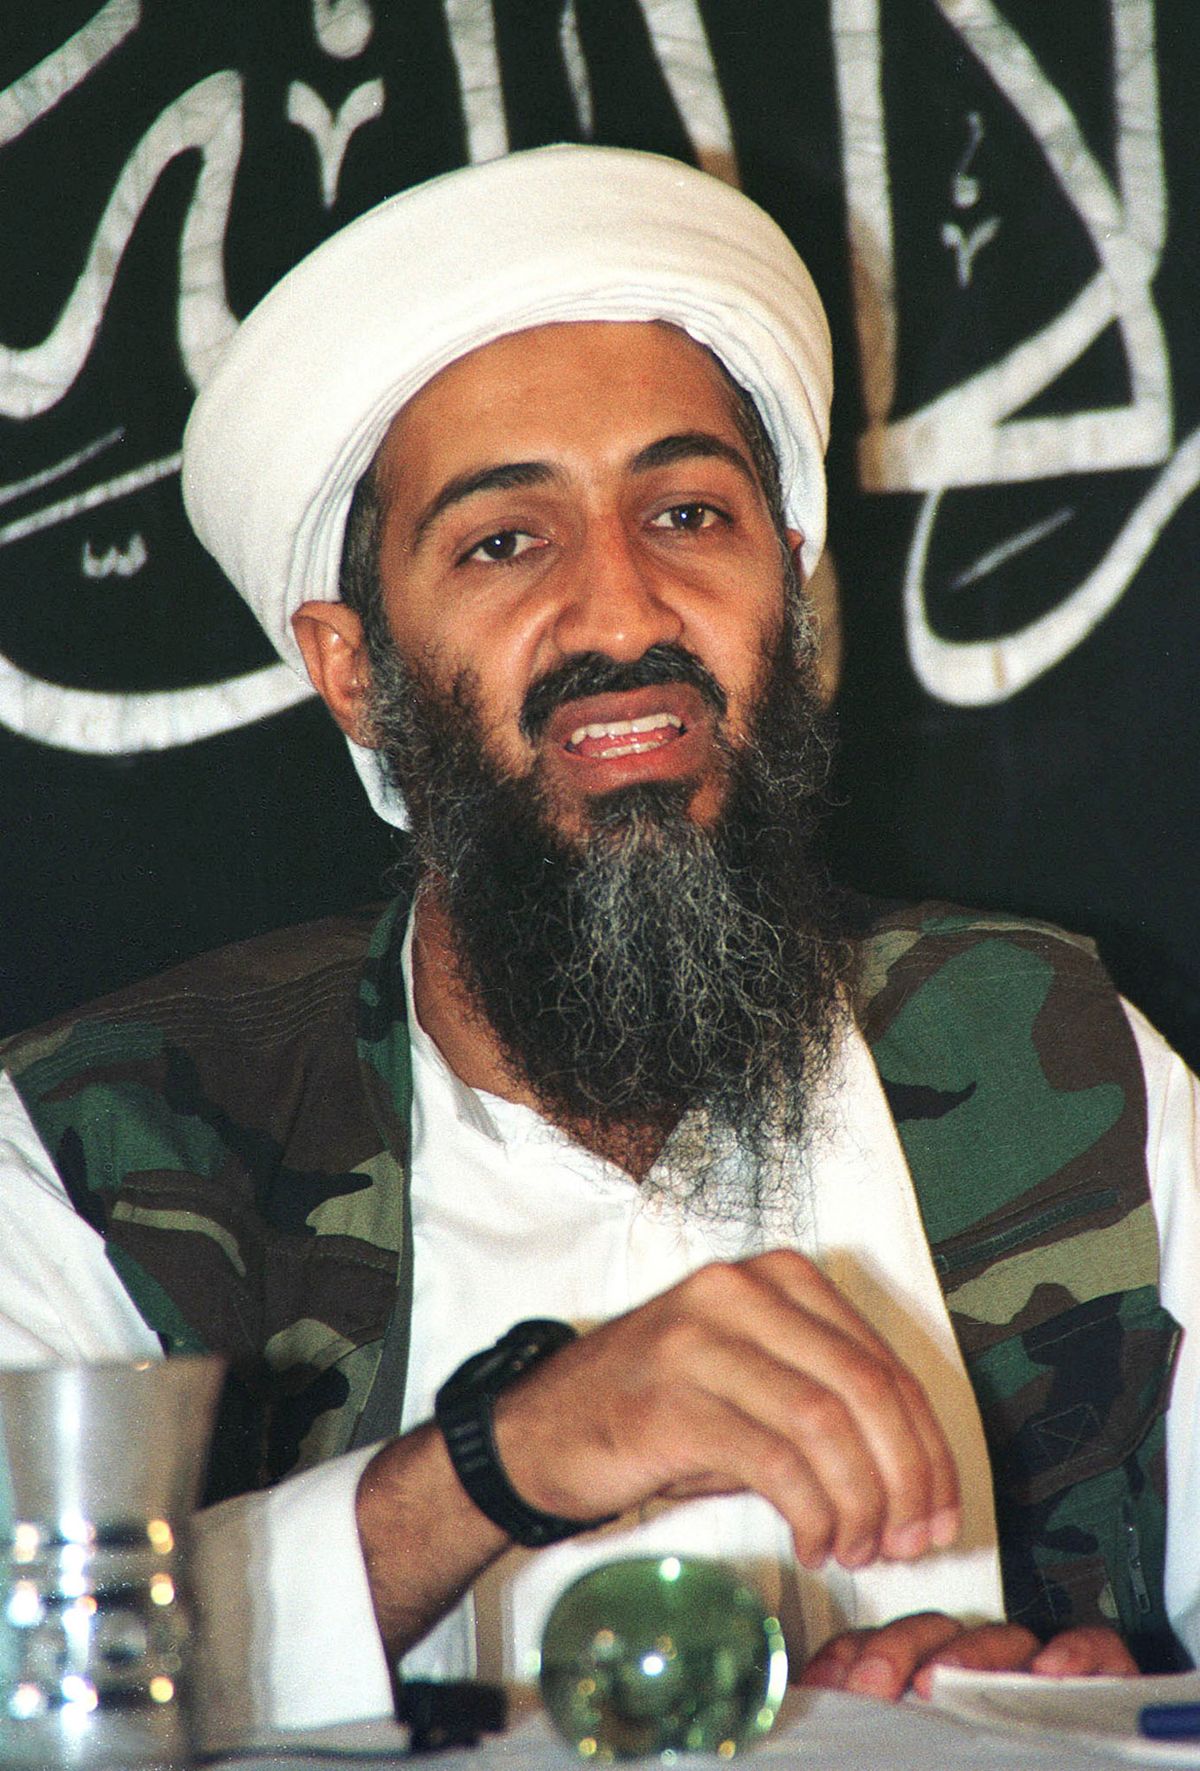 Saudi-born militant Osama bin Laden talks at a news conference in Afghanistan in this May 26, 1998 file photo. Bin Laden accused Washington of plotting to take control of Iraq's oil and urged Iraqis to reject efforts to rebuild a U.S.-backed national unity government there, in an audio recording posted on the Internet on Saturday.  REUTERS/Stringer/Files (AFGHANISTAN) (Â© Stringer Afghanistan / Reuters)